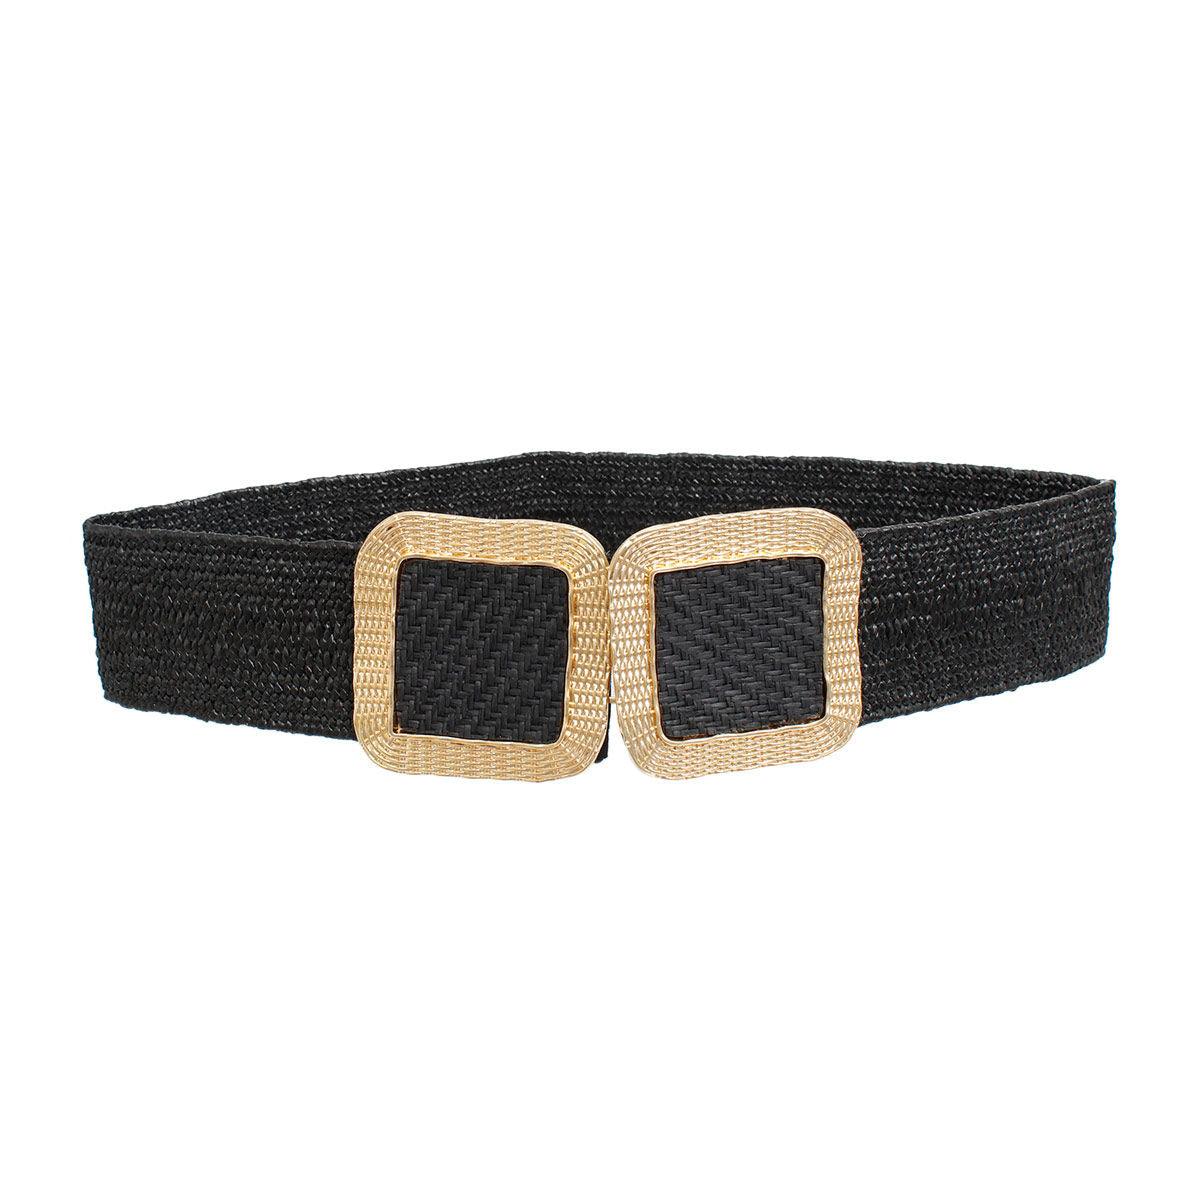 Raffia Belt with Gold Square Buckle and Textured Detailing for Women